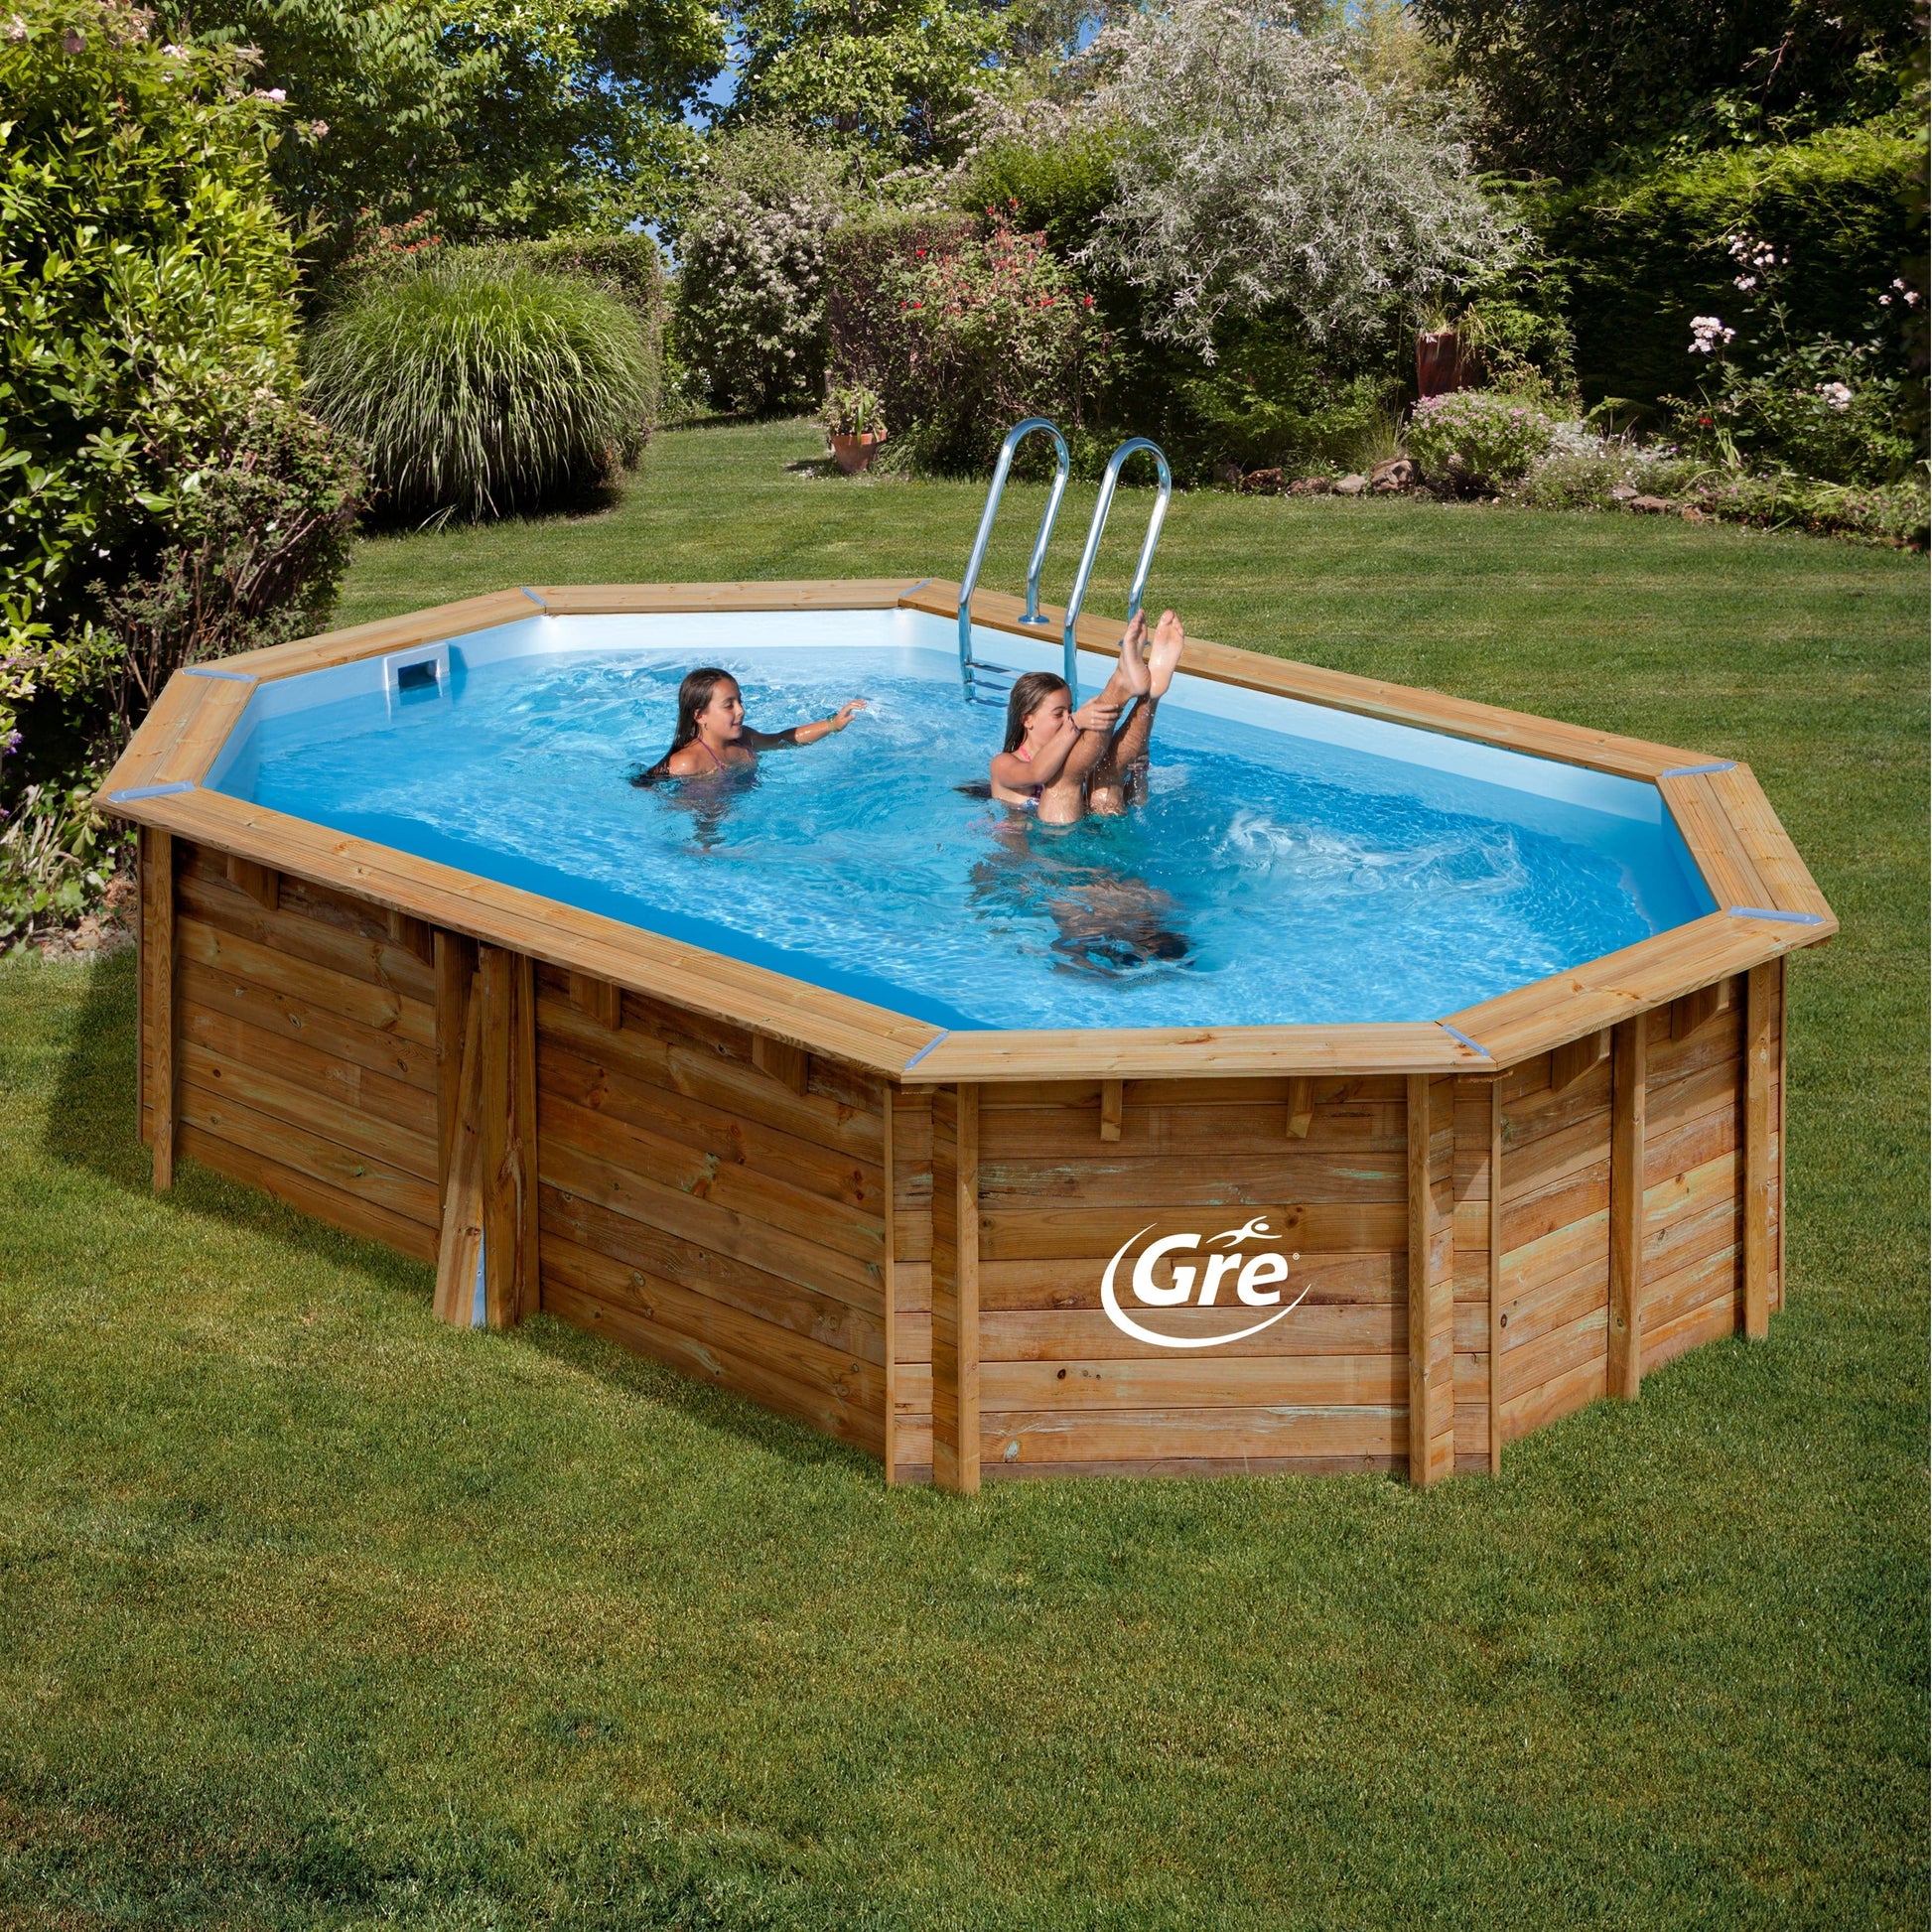 CANNELLE WOODEN OVAL POOL WITH SAND FILTER EXTERNAL DIMENSIONS 551X351 H 119 - best price from Maltashopper.com BR500011632